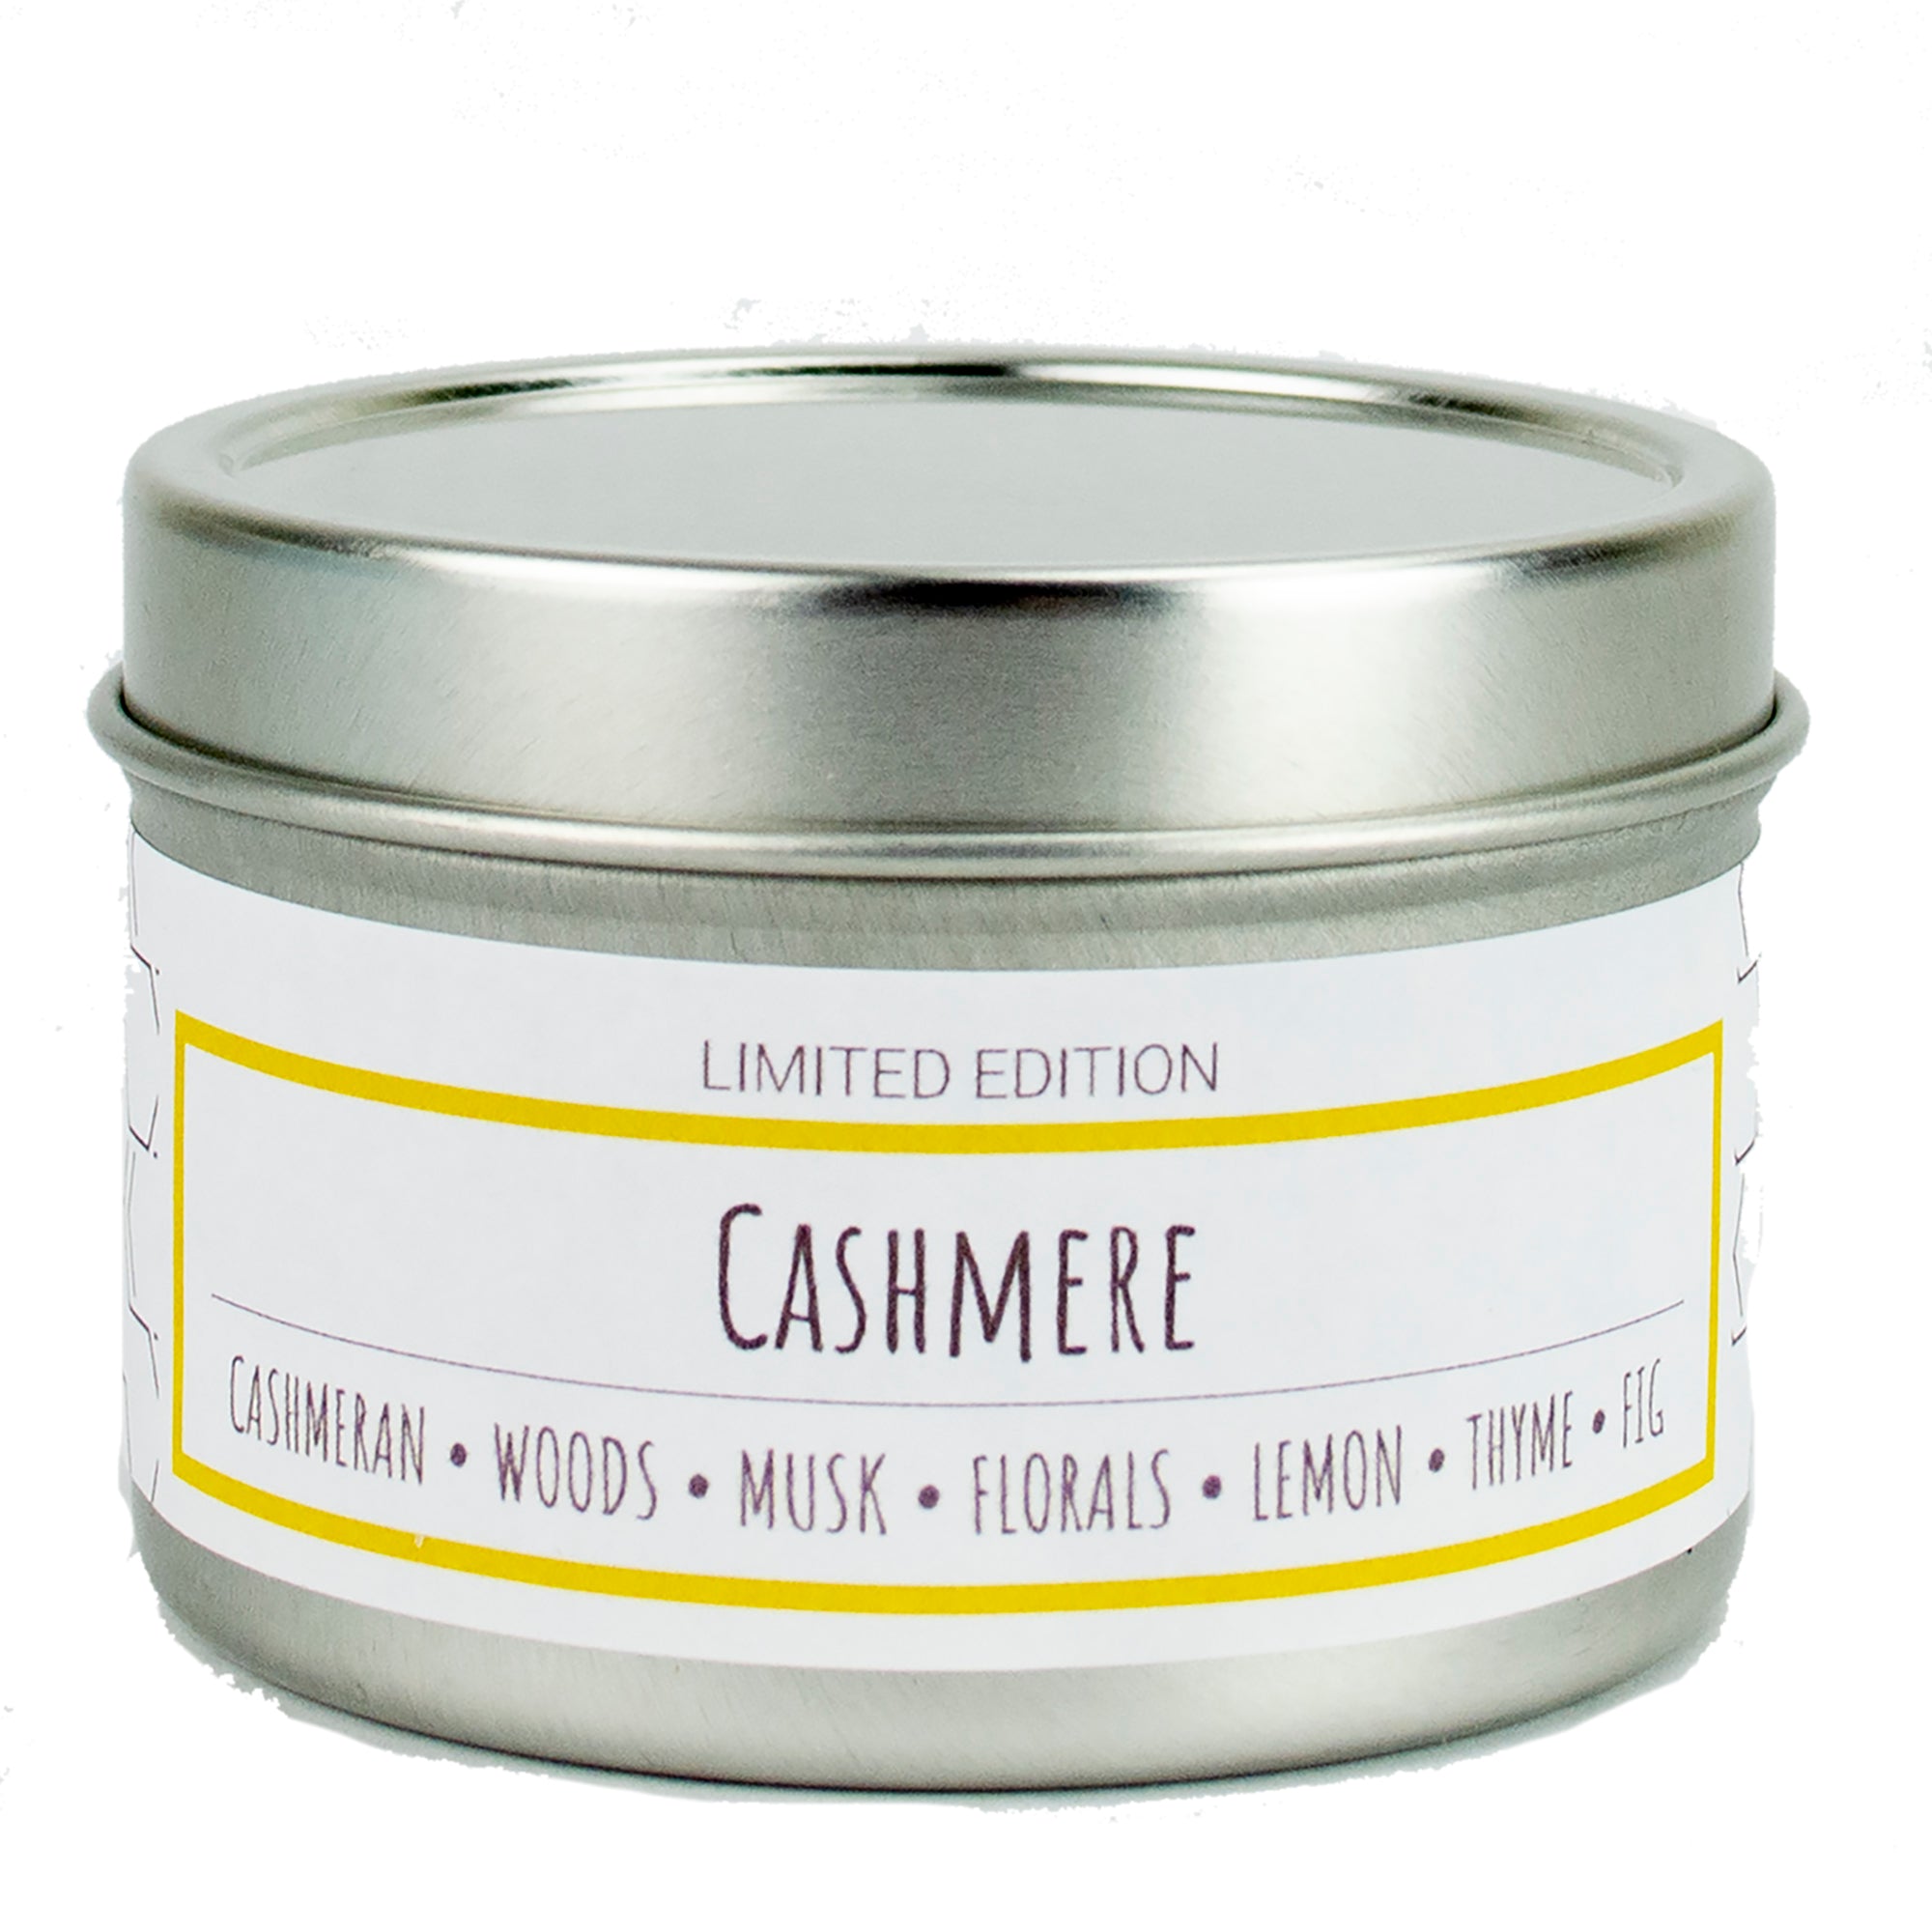 Cashmere scented 3 oz. soy candle in travel tin - Limited Edition